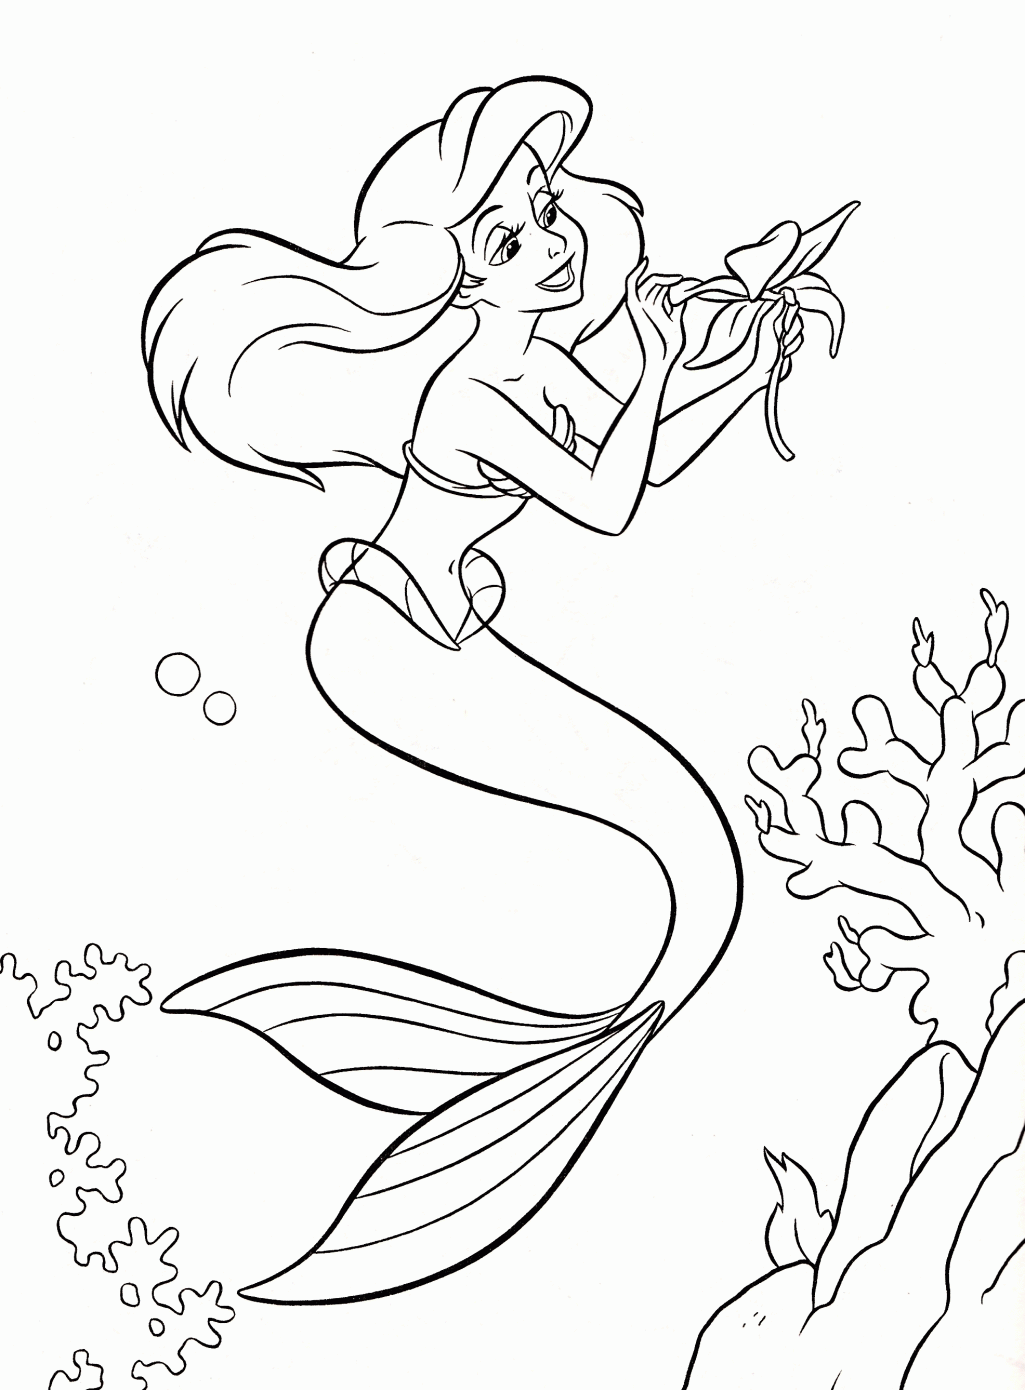 Disney Princess Characters Coloring Pages Gallery Coloring Page ...